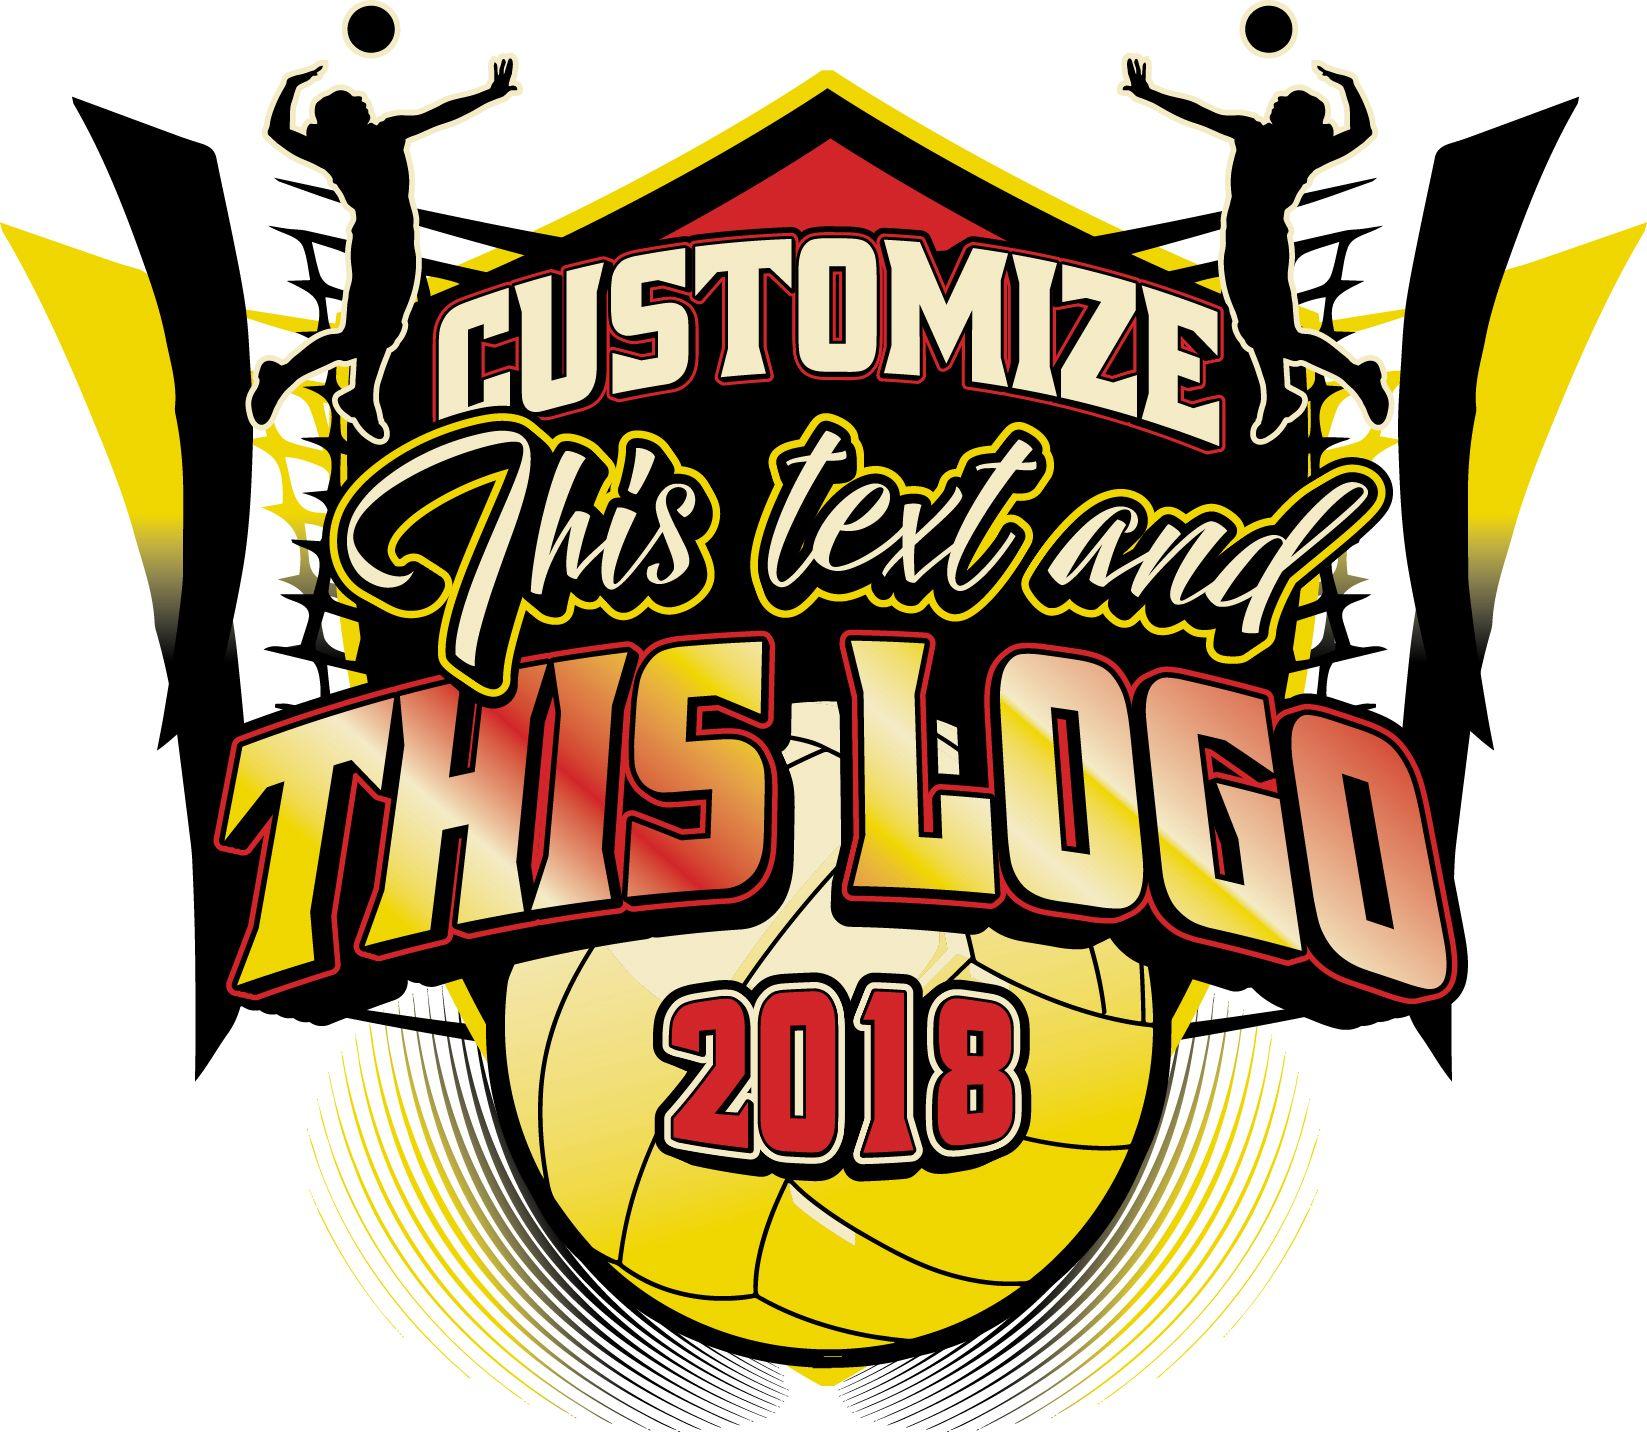 Volleyball Logo - VOLLEYBALL T Shirt Logo Design With Adjustable Text And All Graphic